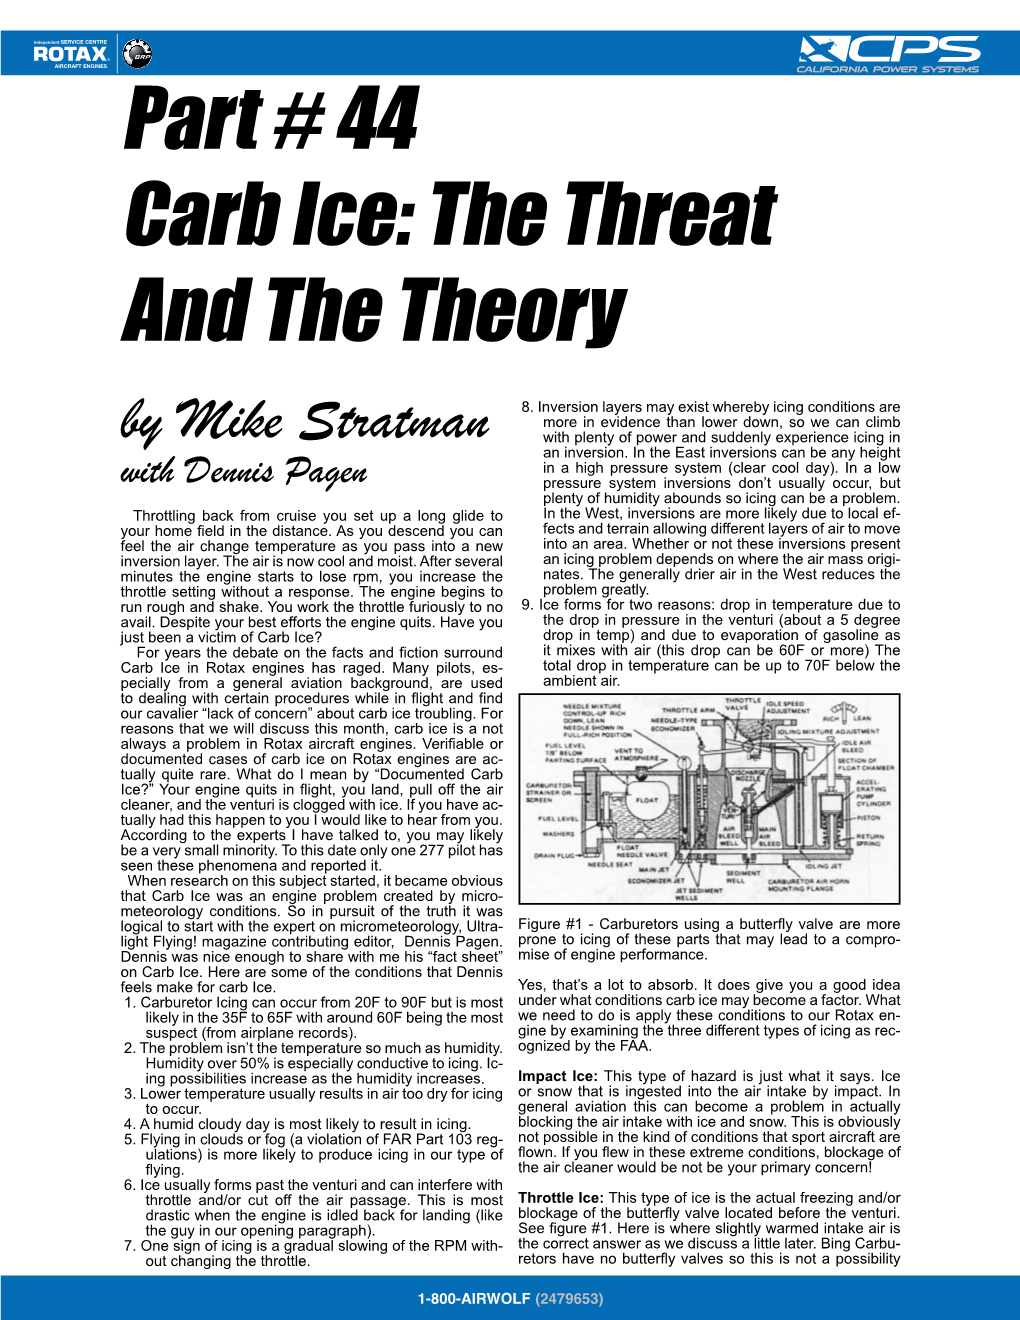 Carb Ice: the Threat and the Theory